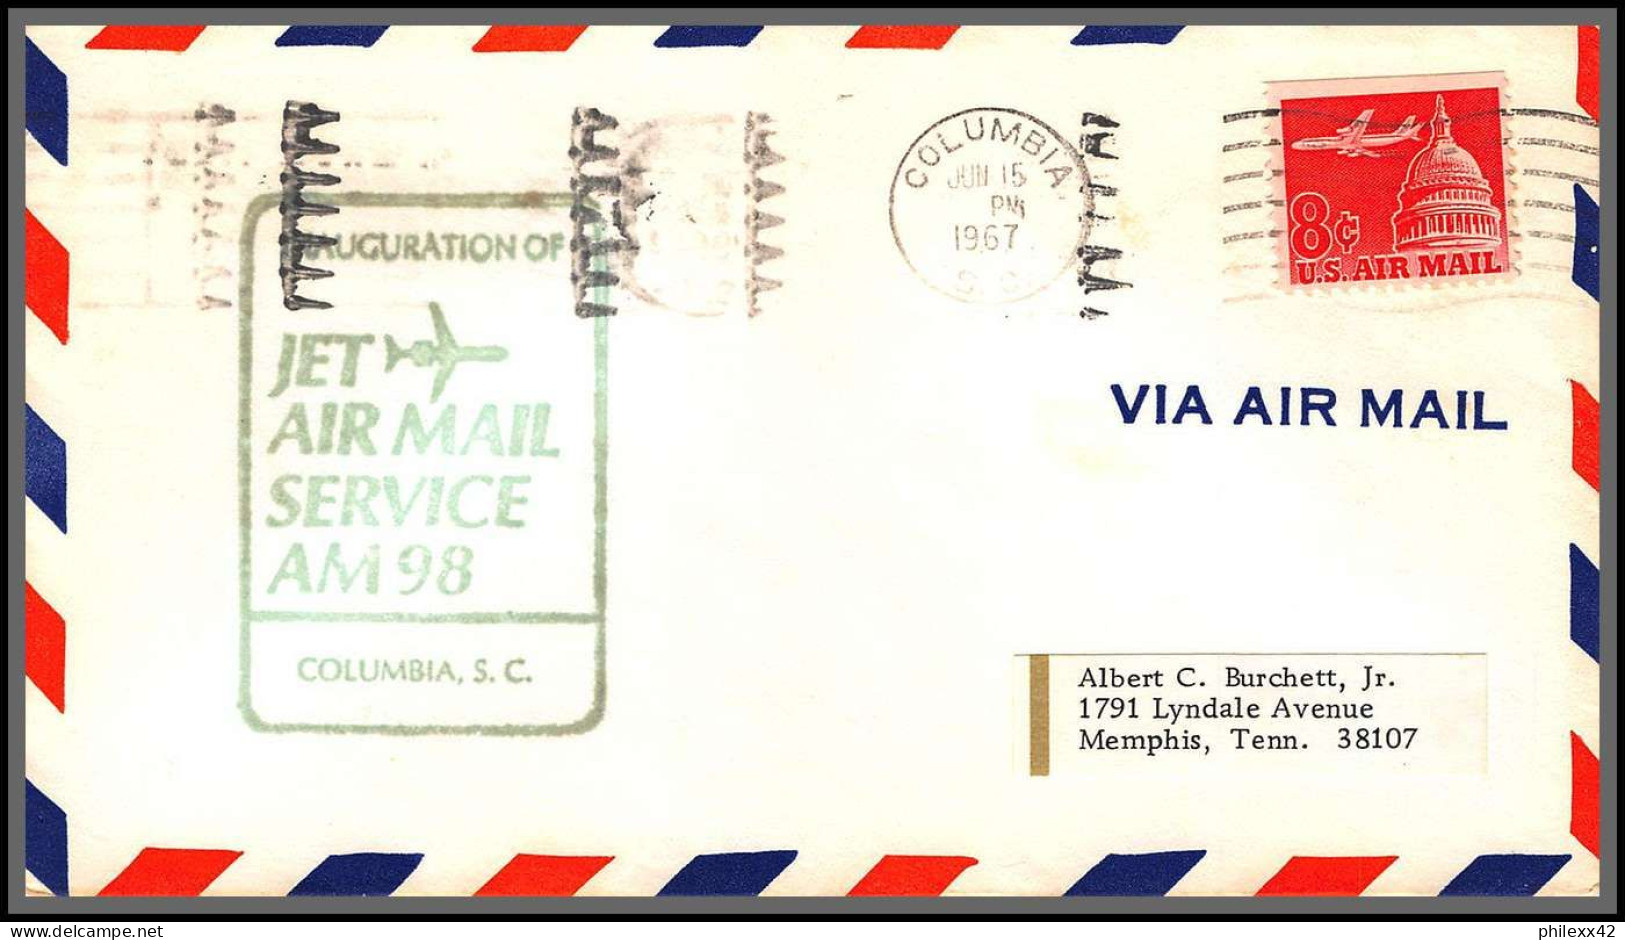 12510 Am 98 Columbia 15/6/1967 Inauguration Premier Vol First Flight Lettre Jet Air Mail Service Cover Usa Aviation - 3c. 1961-... Lettres